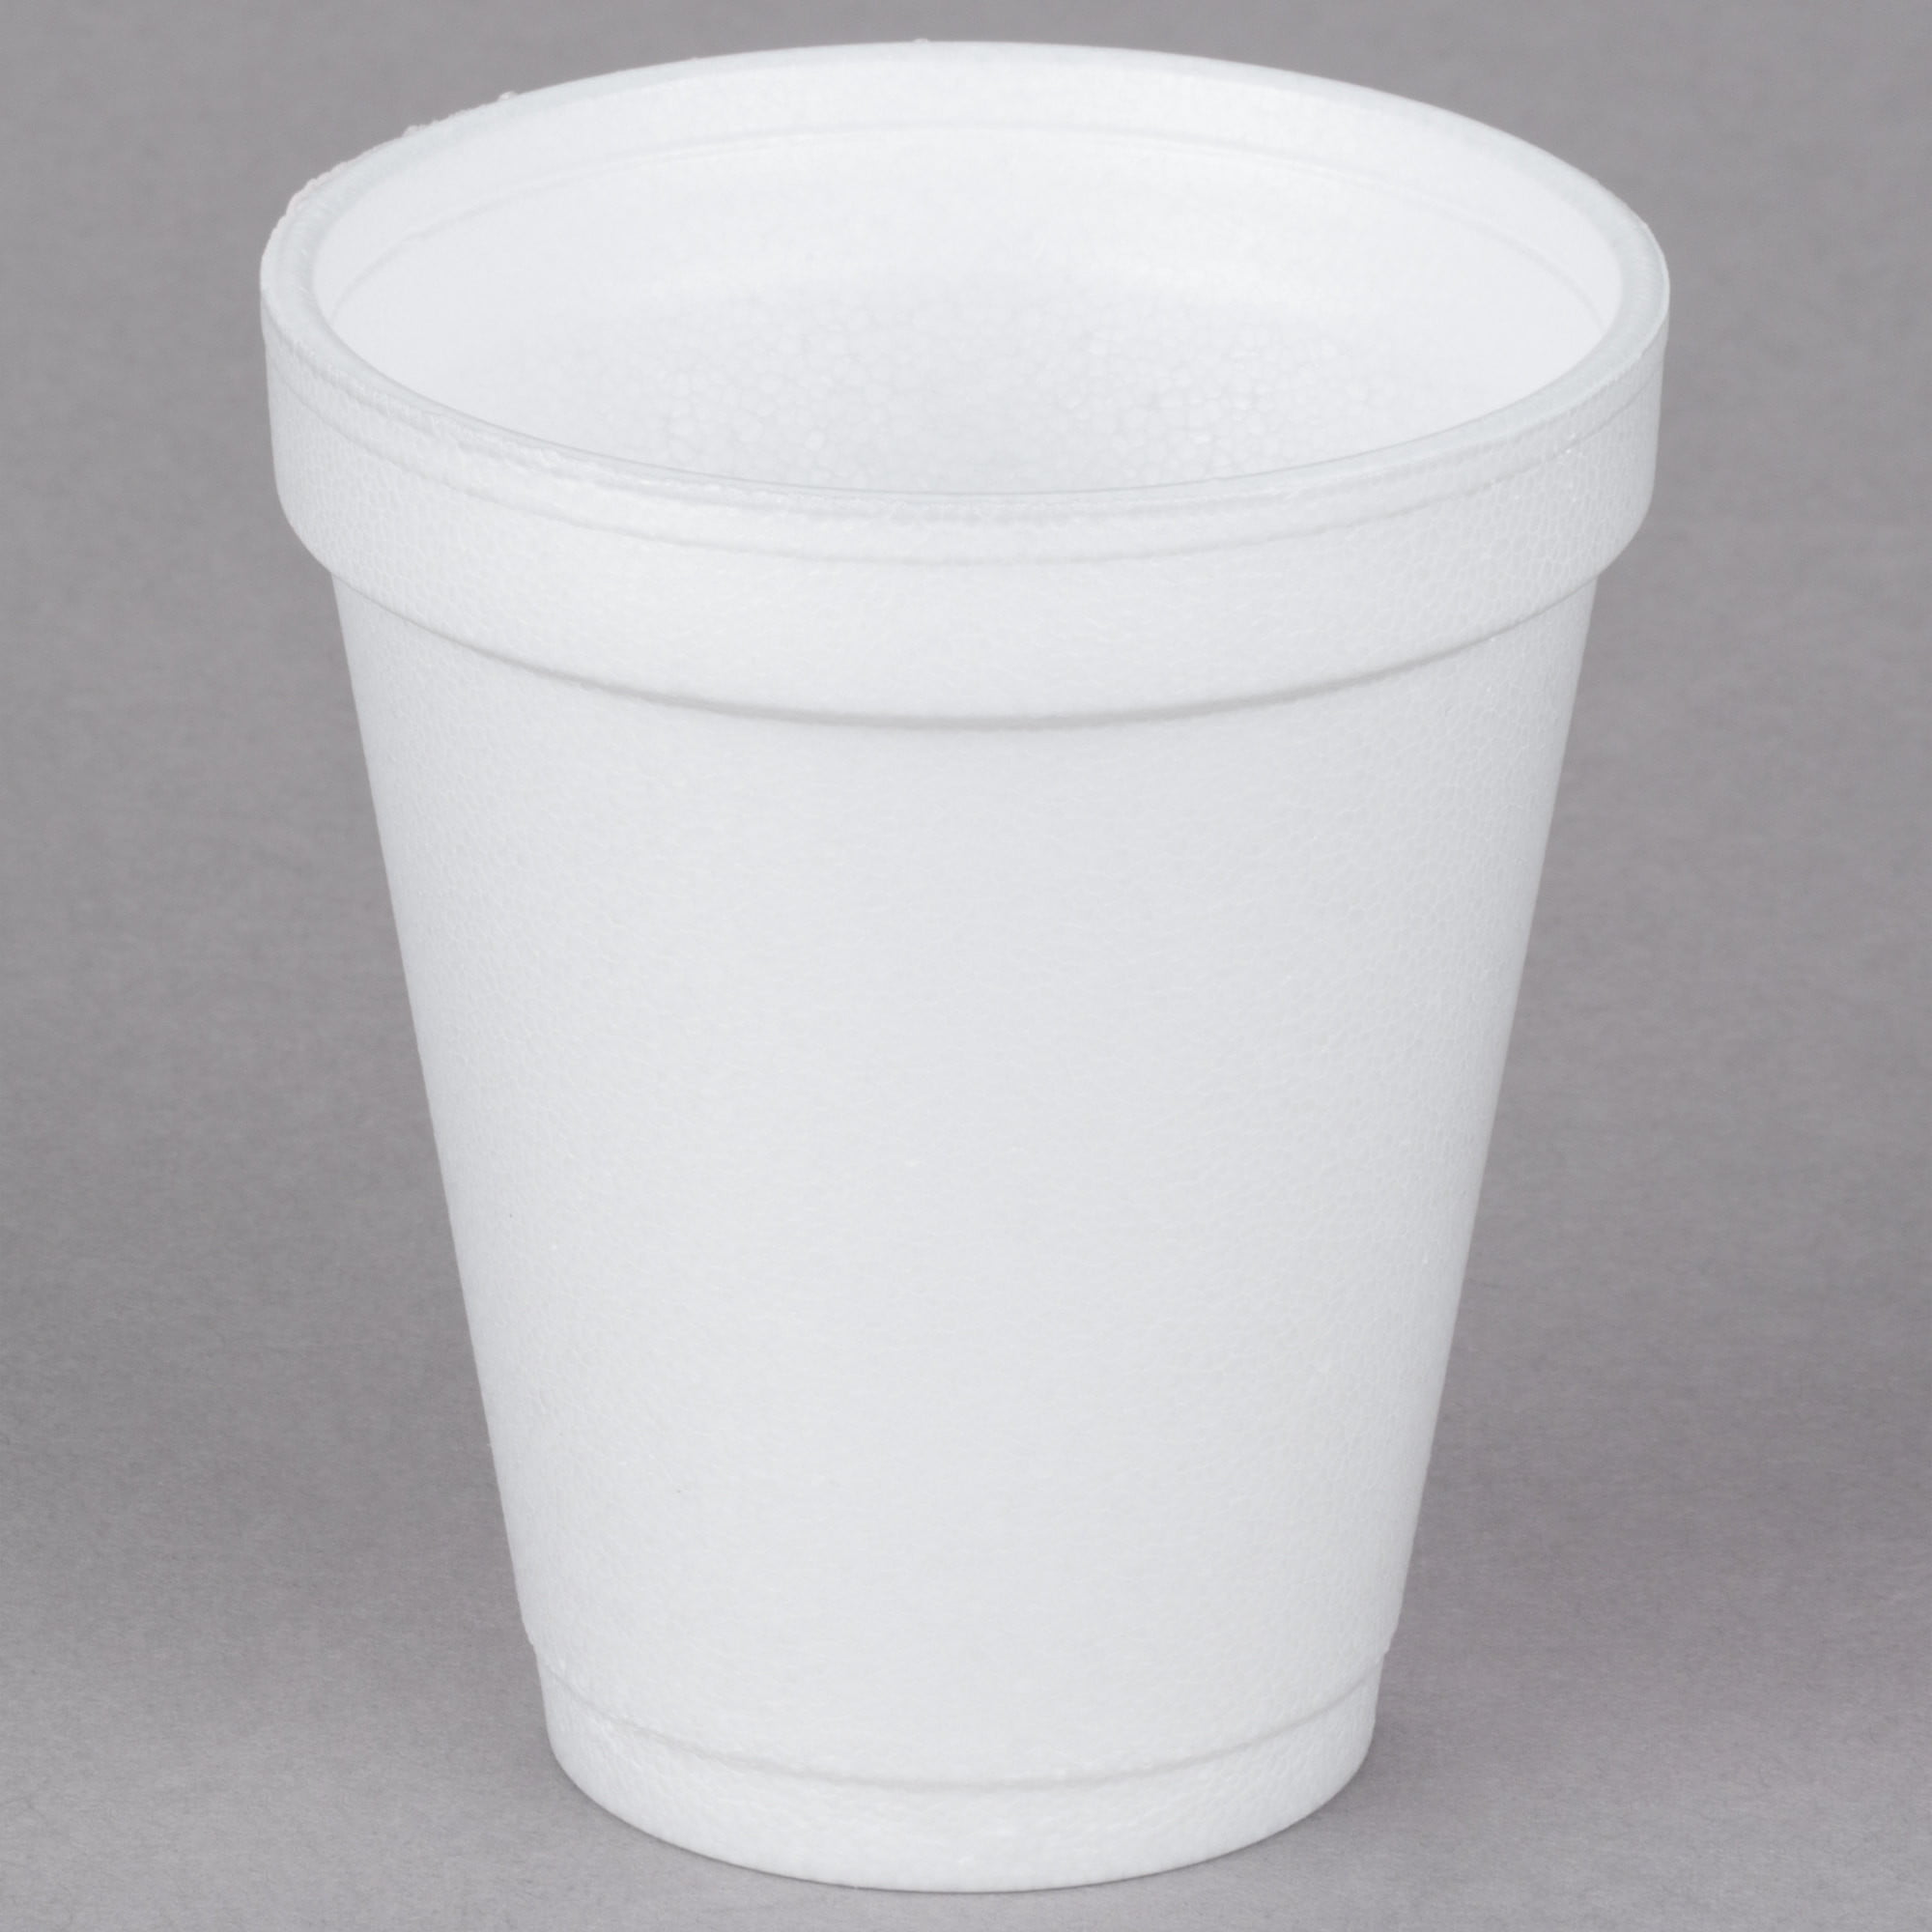 25 Pack for sale online Dart 6J6 J Cup Insulated Foam Disposable Cups White 